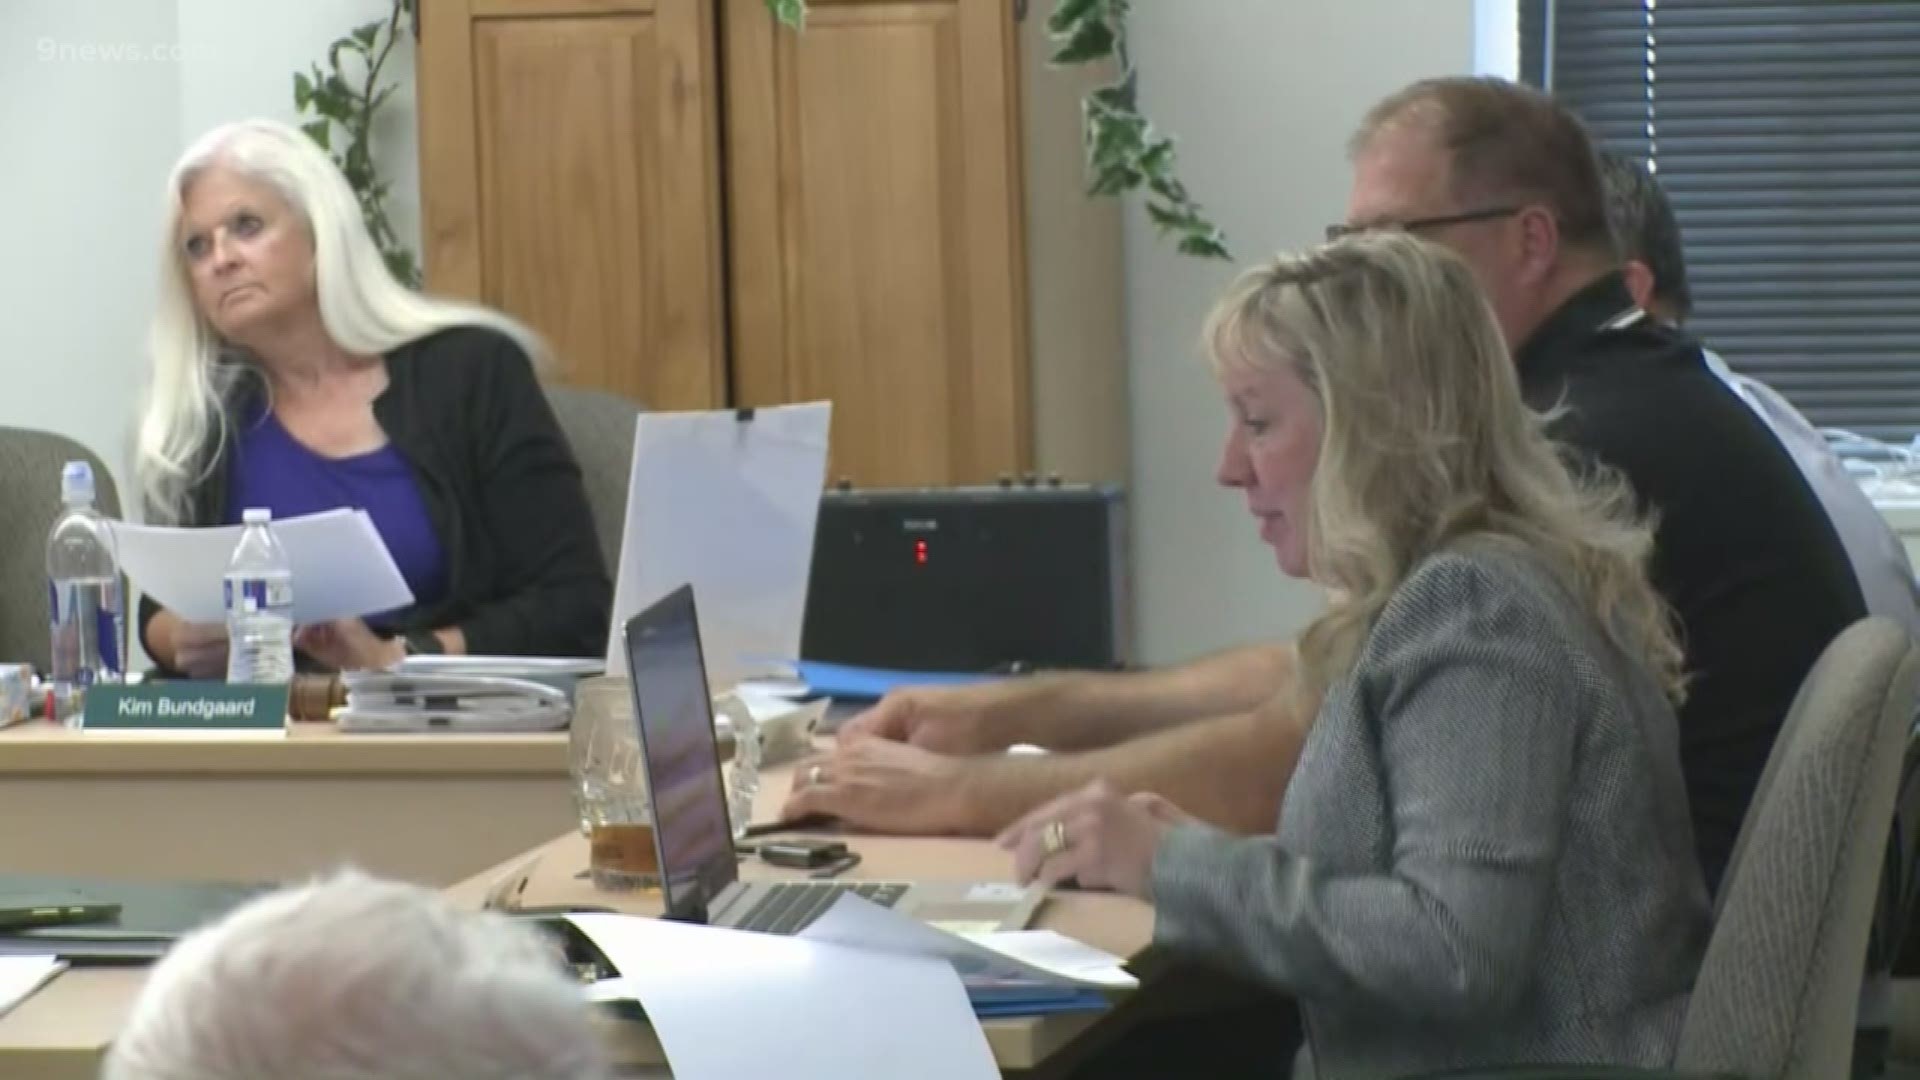 The Park County RE-2 School Board says it offered a $2,000 raise back in May. The teachers union says that's not enough - they want to triple that.